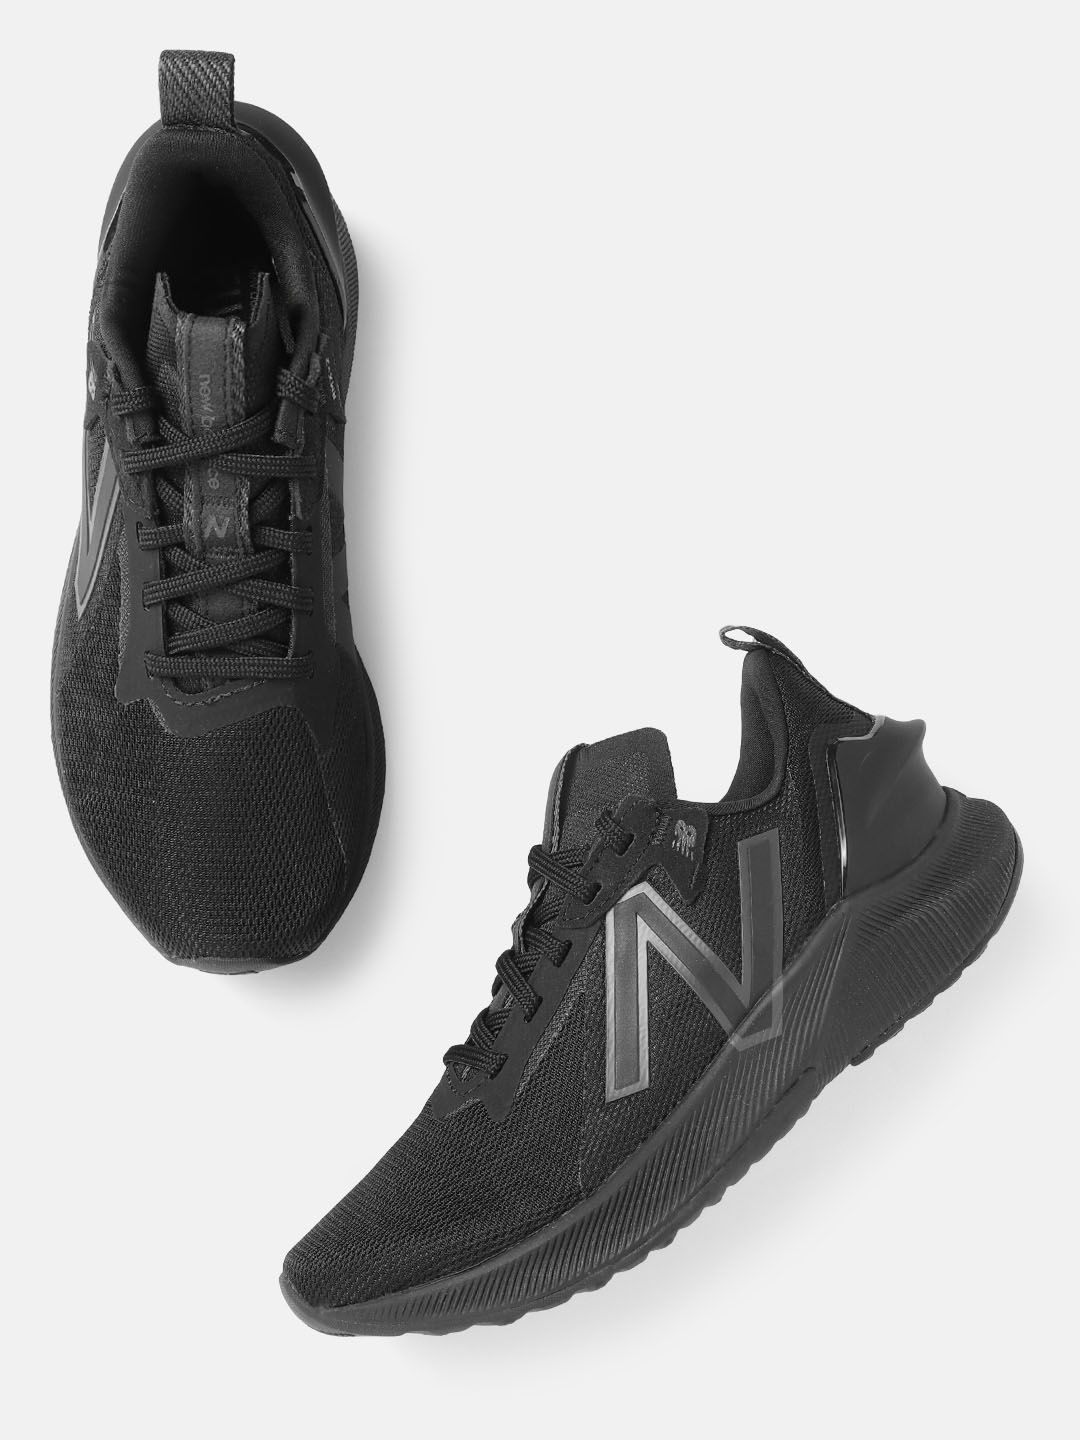 New Balance Women Black Solid Woven Design Propel Remix Running Shoes Price in India